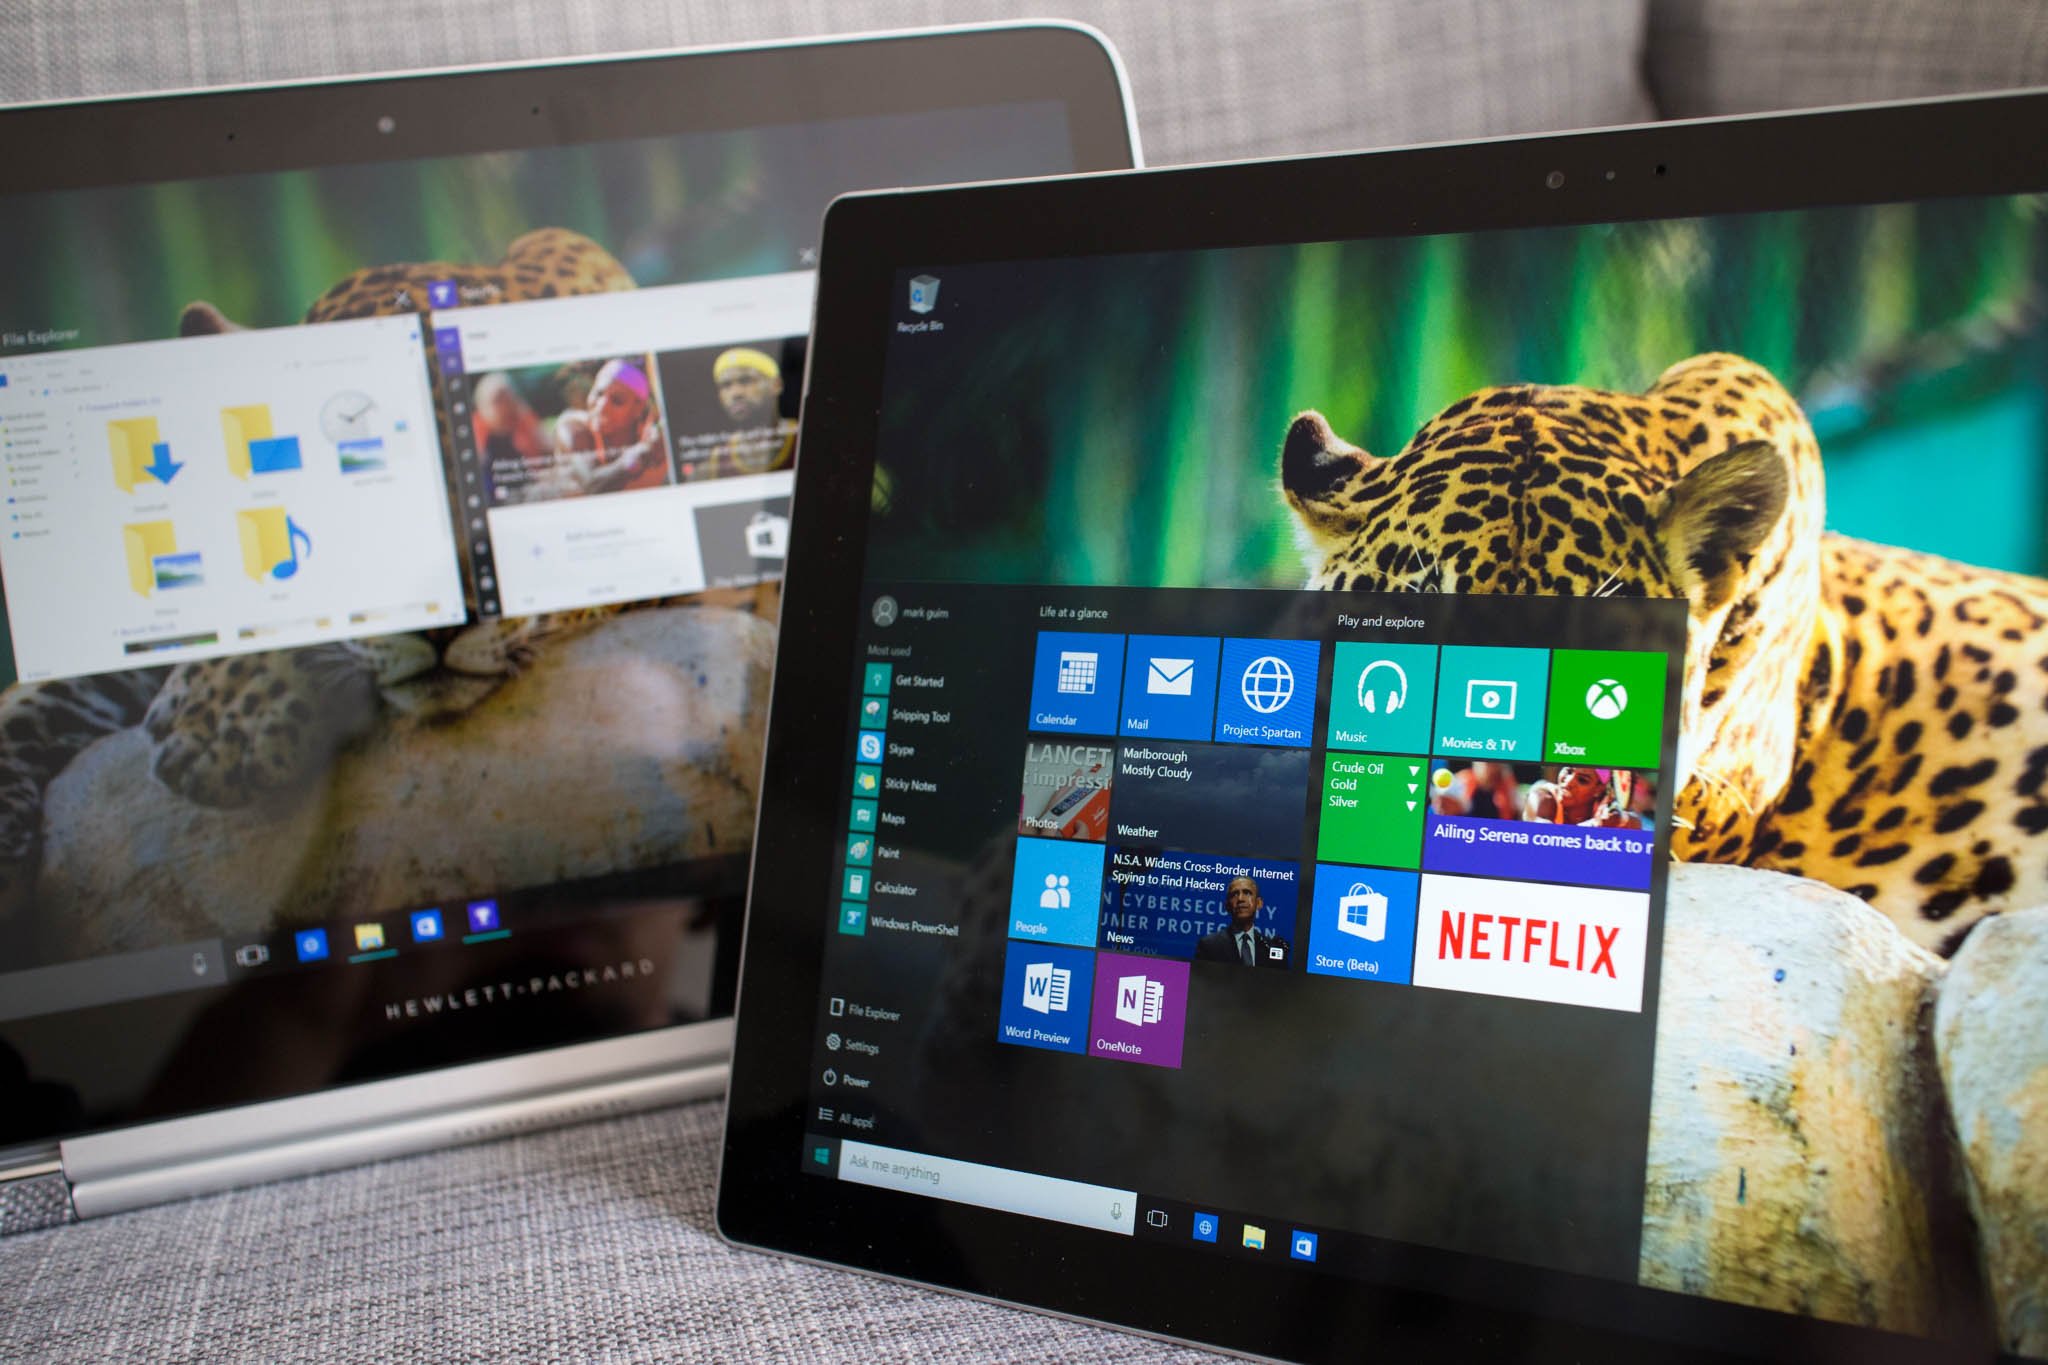 Windows 10 is 4 times more popular than Mac, Apple&#39;s own numbers show